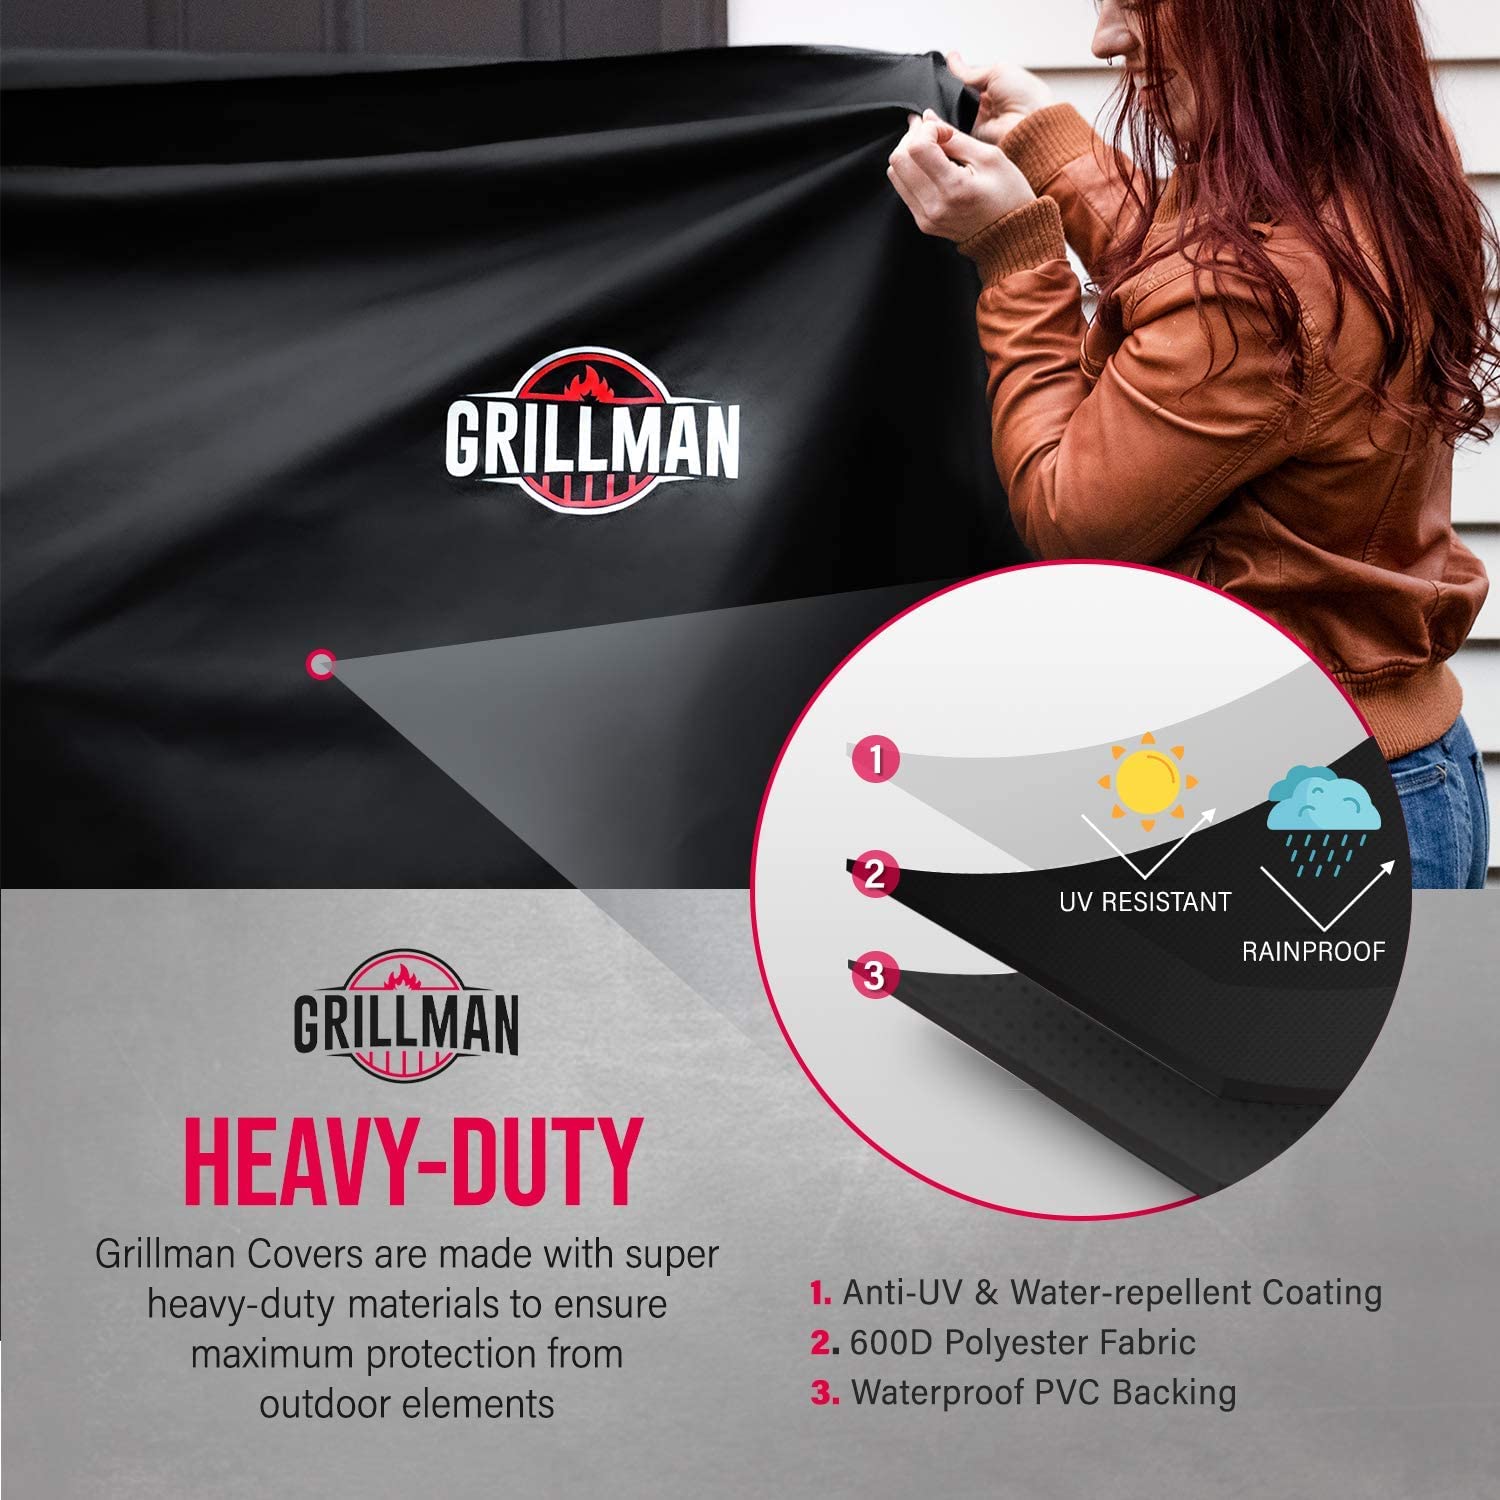 Grillman Premium BBQ Grill Cover Heavy-Duty Gas Grill Cover for Weber Brinkmann Char Broil etc. Rip-Proof UV & Water-Resistant. (58 L x 24 W x 48 H, Black) - image 3 of 7